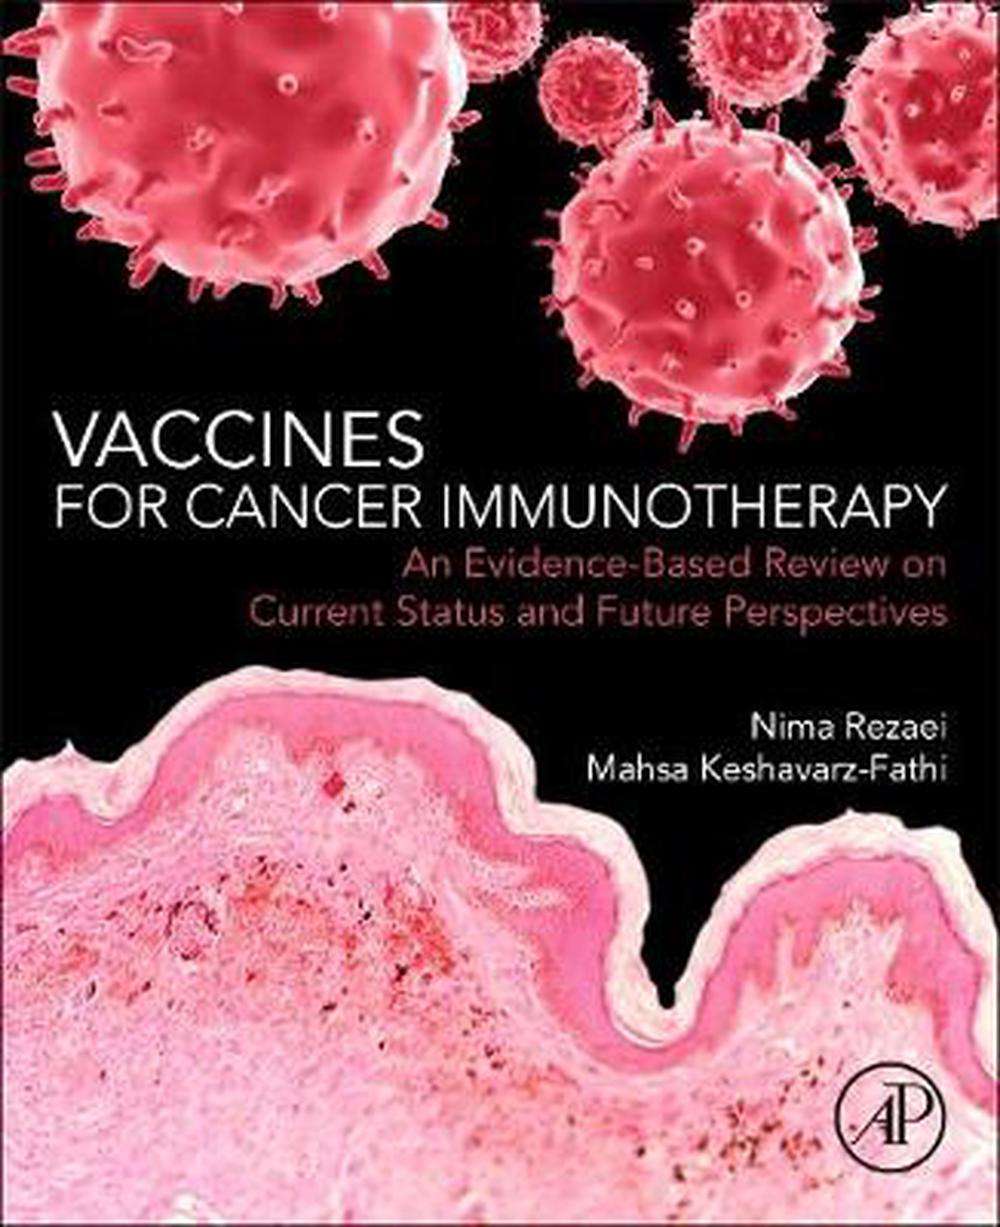 Vaccines for Cancer Immunotherapy: An Evidence